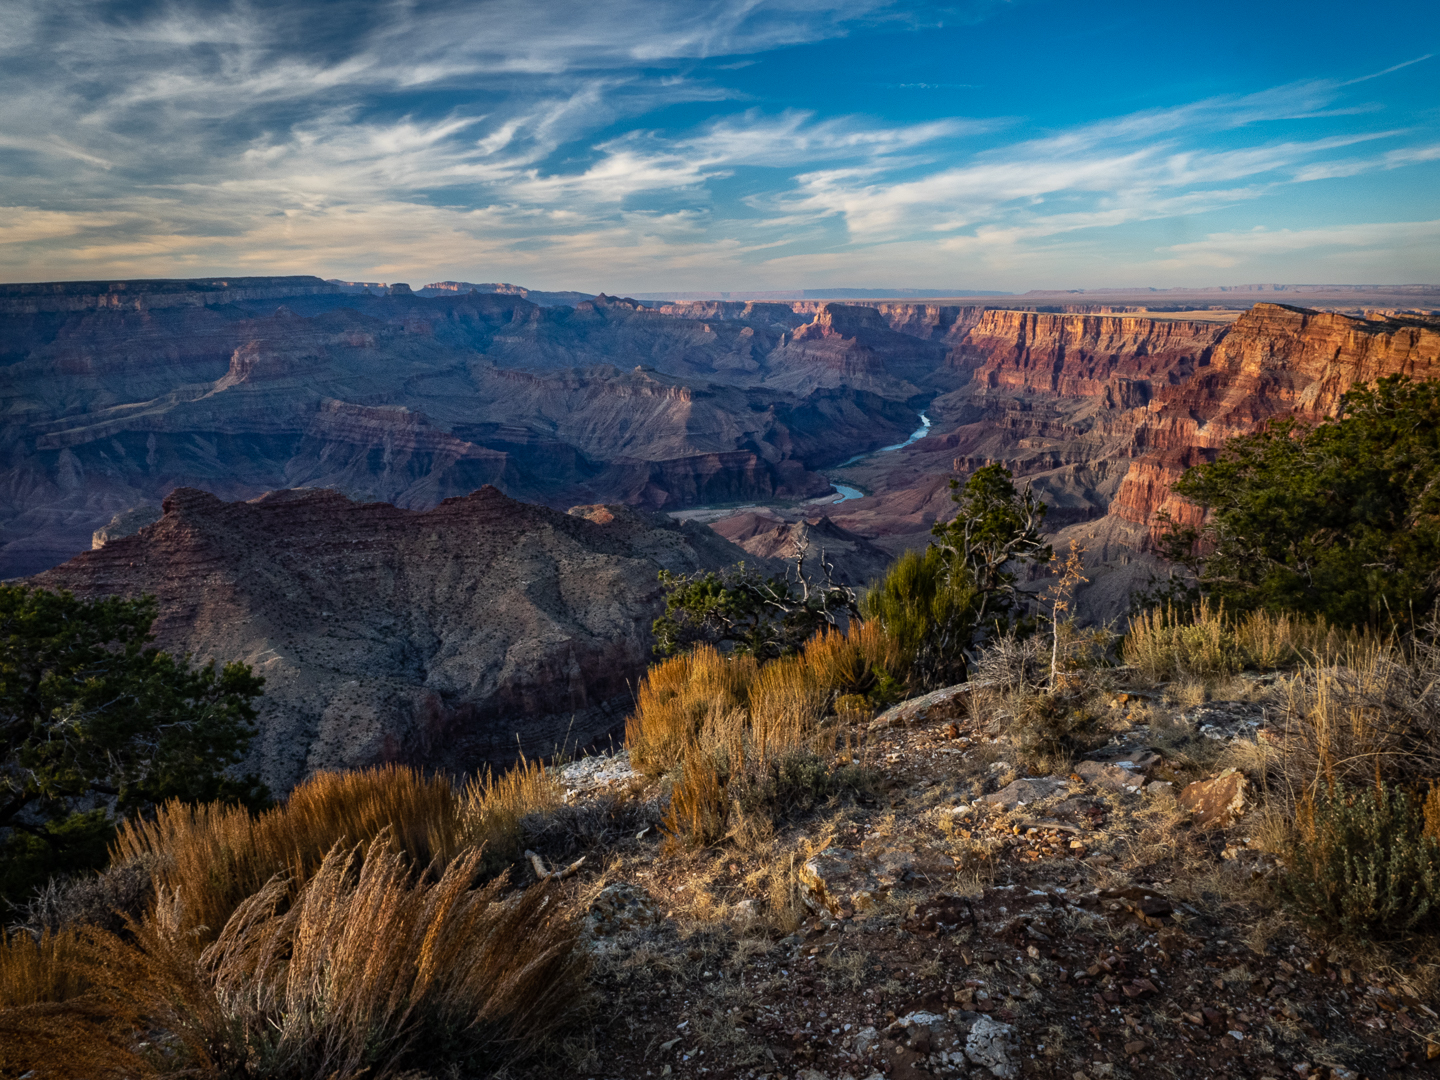 3rd PrizeNature In Class 2 By Jim Cotter For Grand Canyon Sunset JAN-2022.jpg